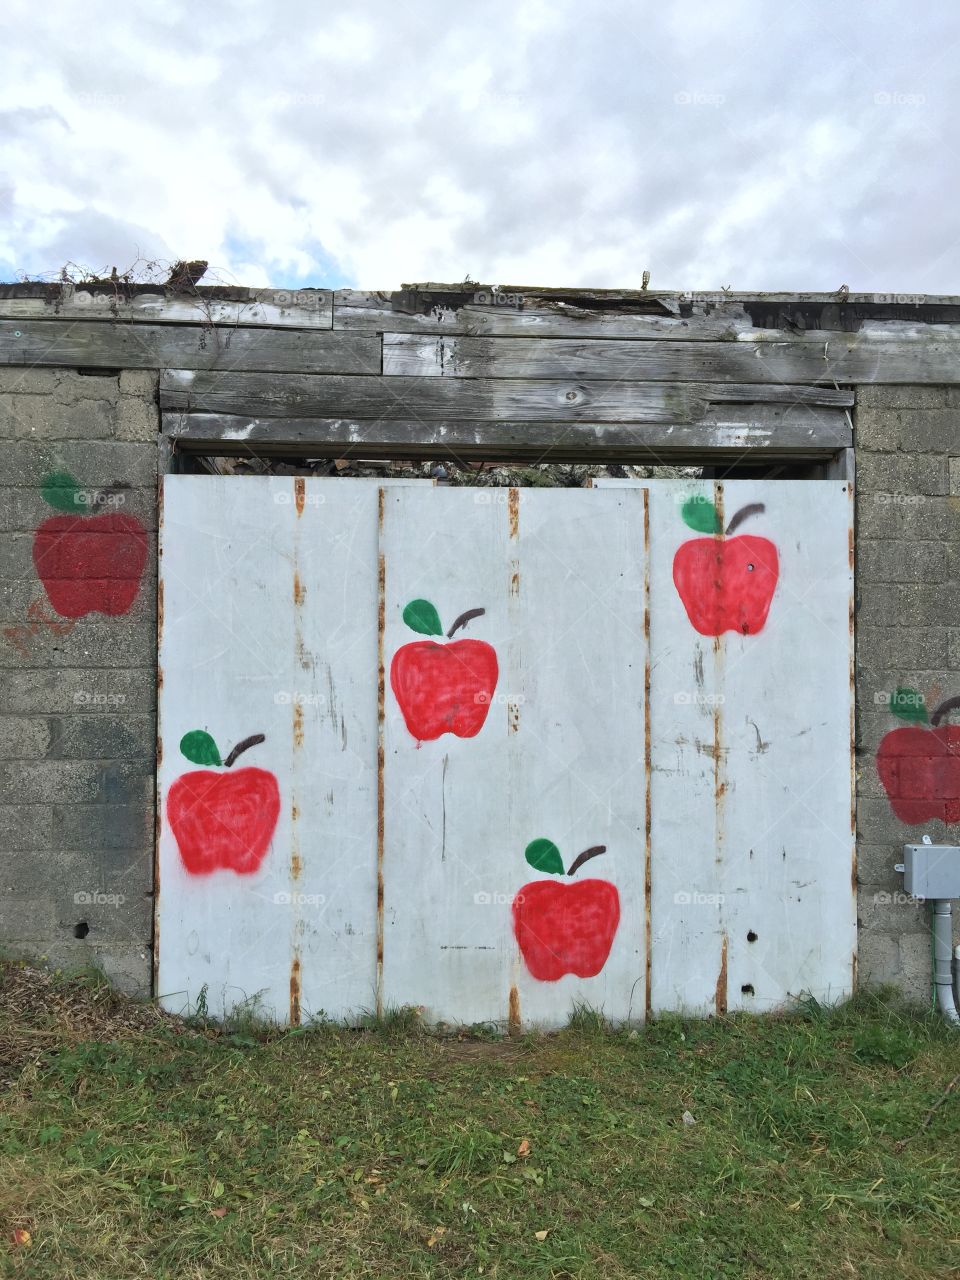 Folk Art Apple Painting. Giant apples adorn a shed door at an outdoor fruit stand in New York State, near Brewster.